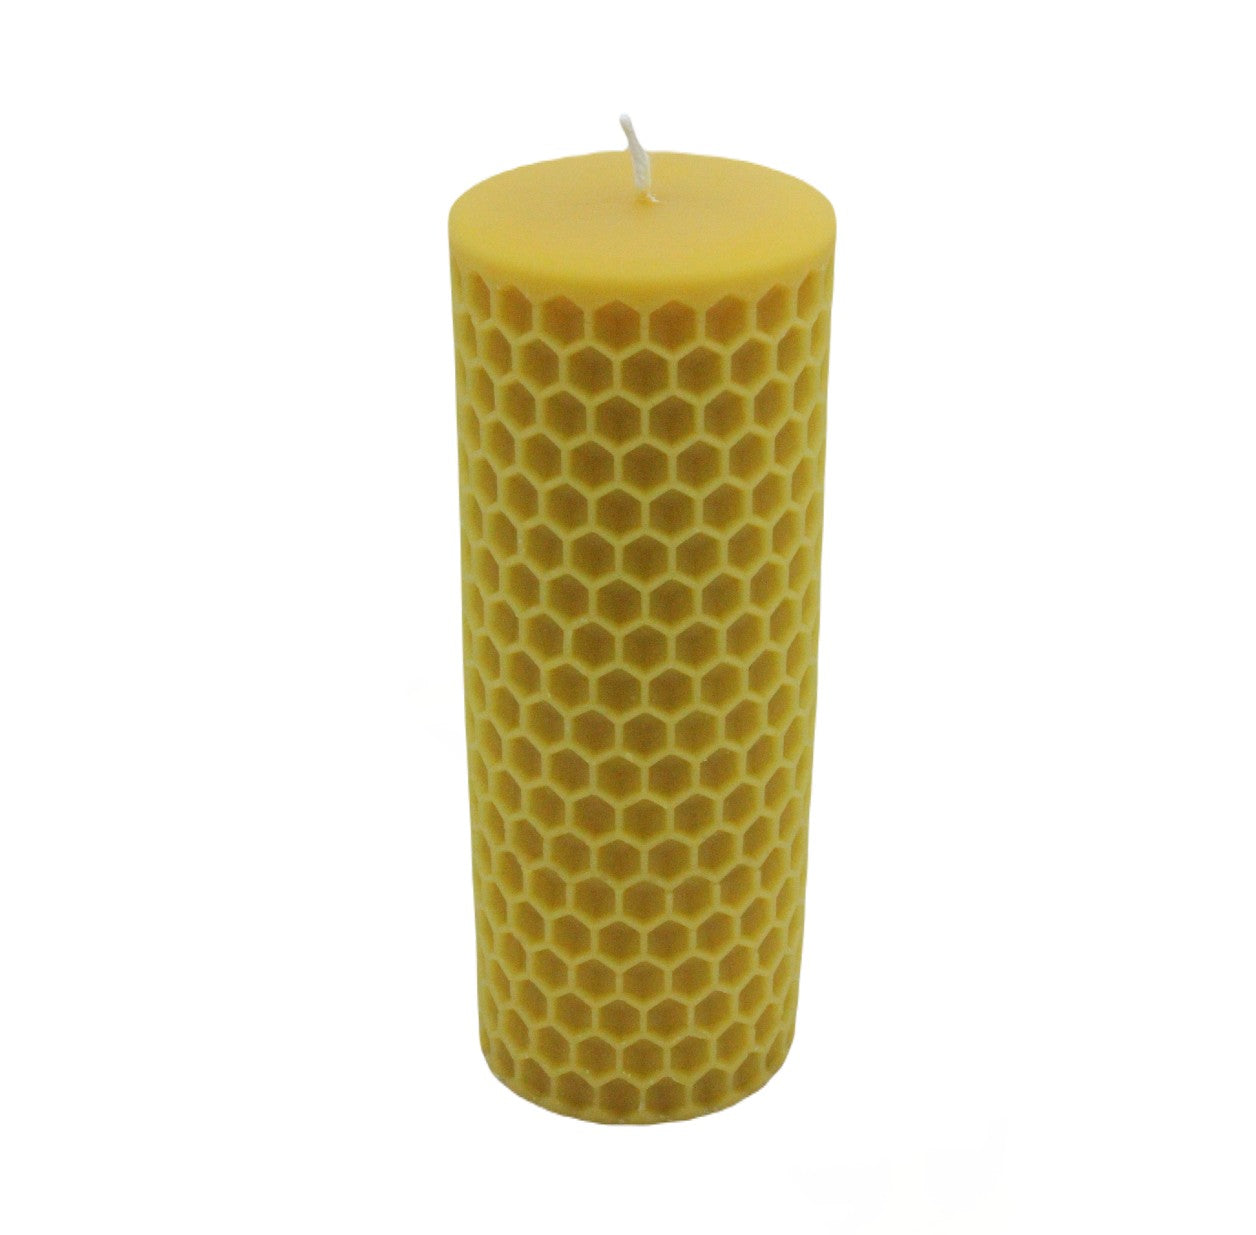 6.5" x 2.5" Honey Bee Cell Candle